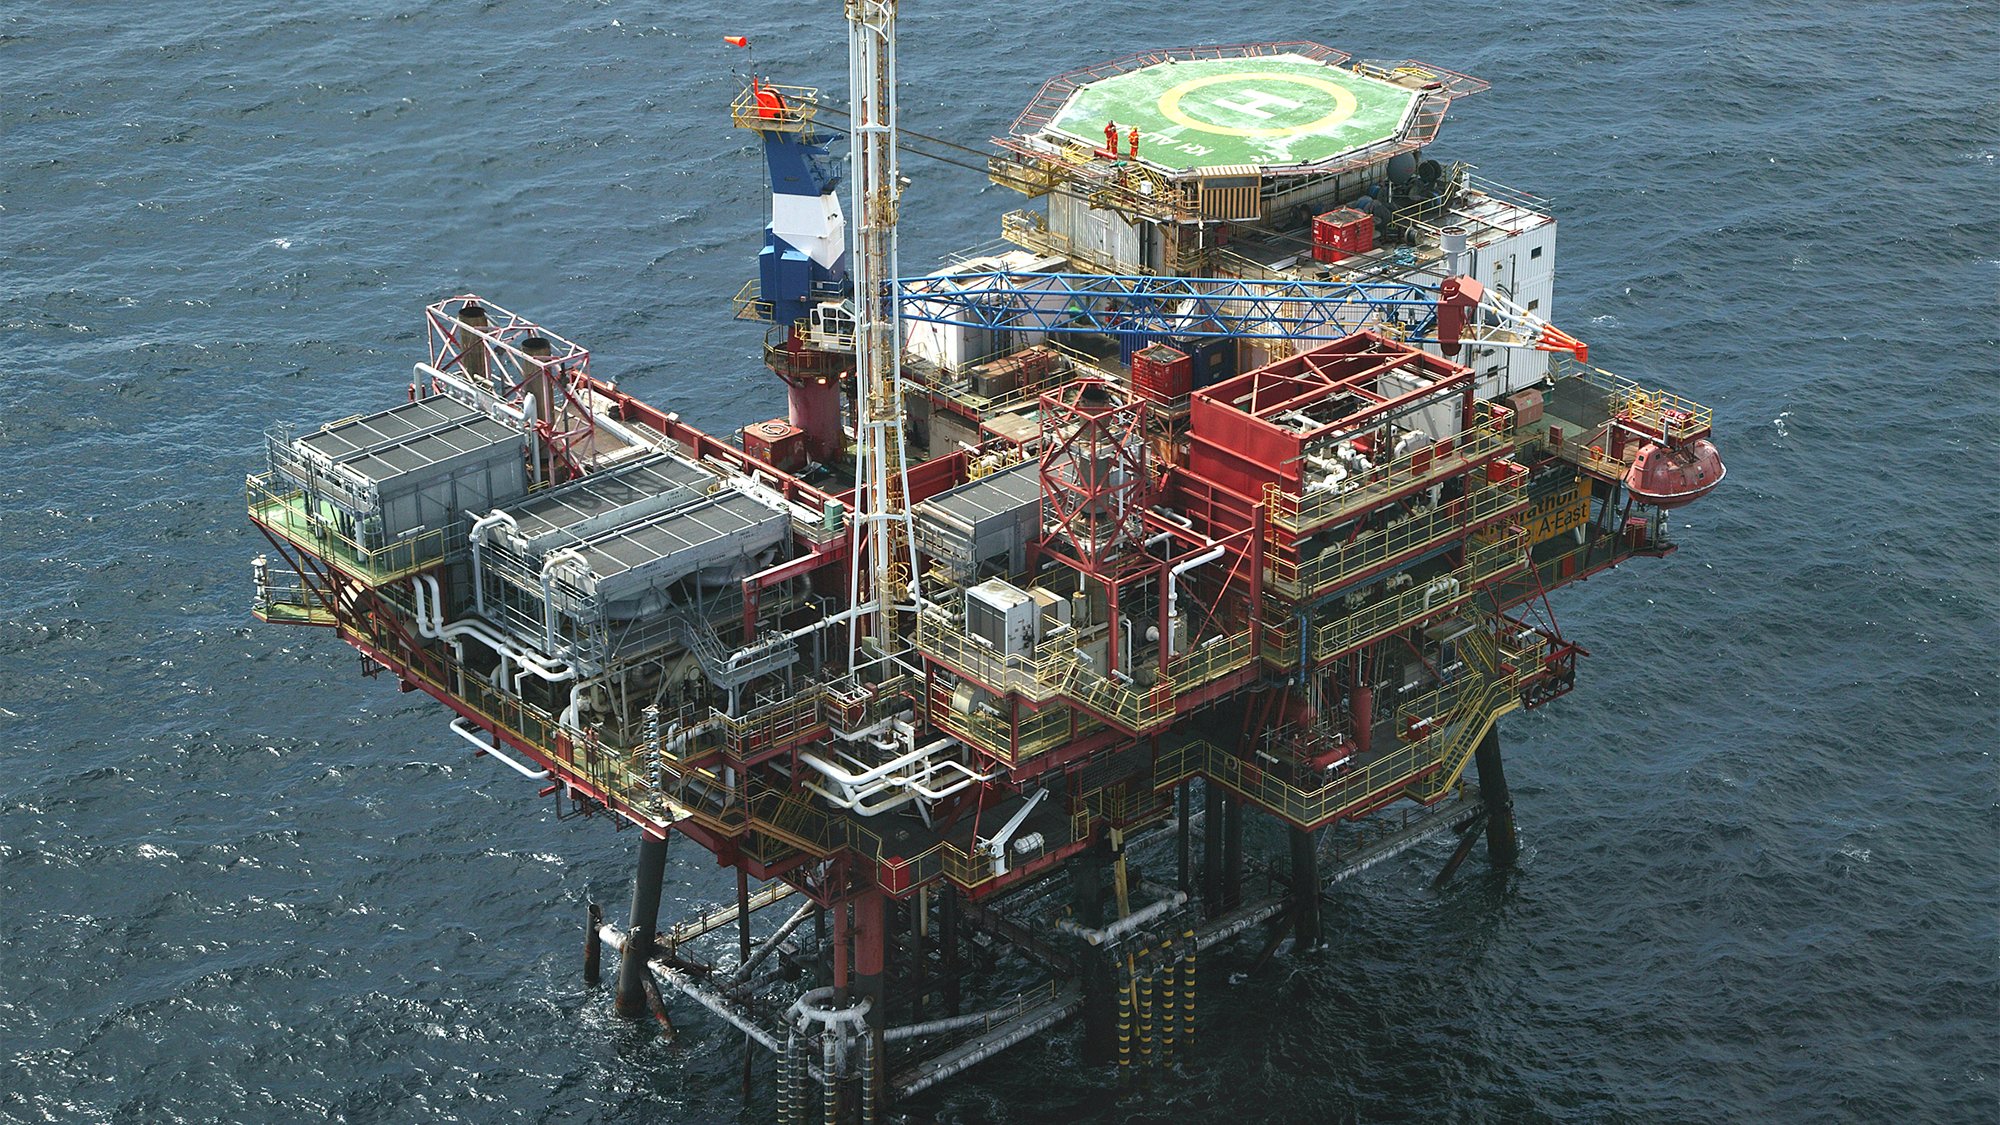 The Kinsale Head is a gas field development comprising two offshore platforms with associated subsea pipelines and facilities.